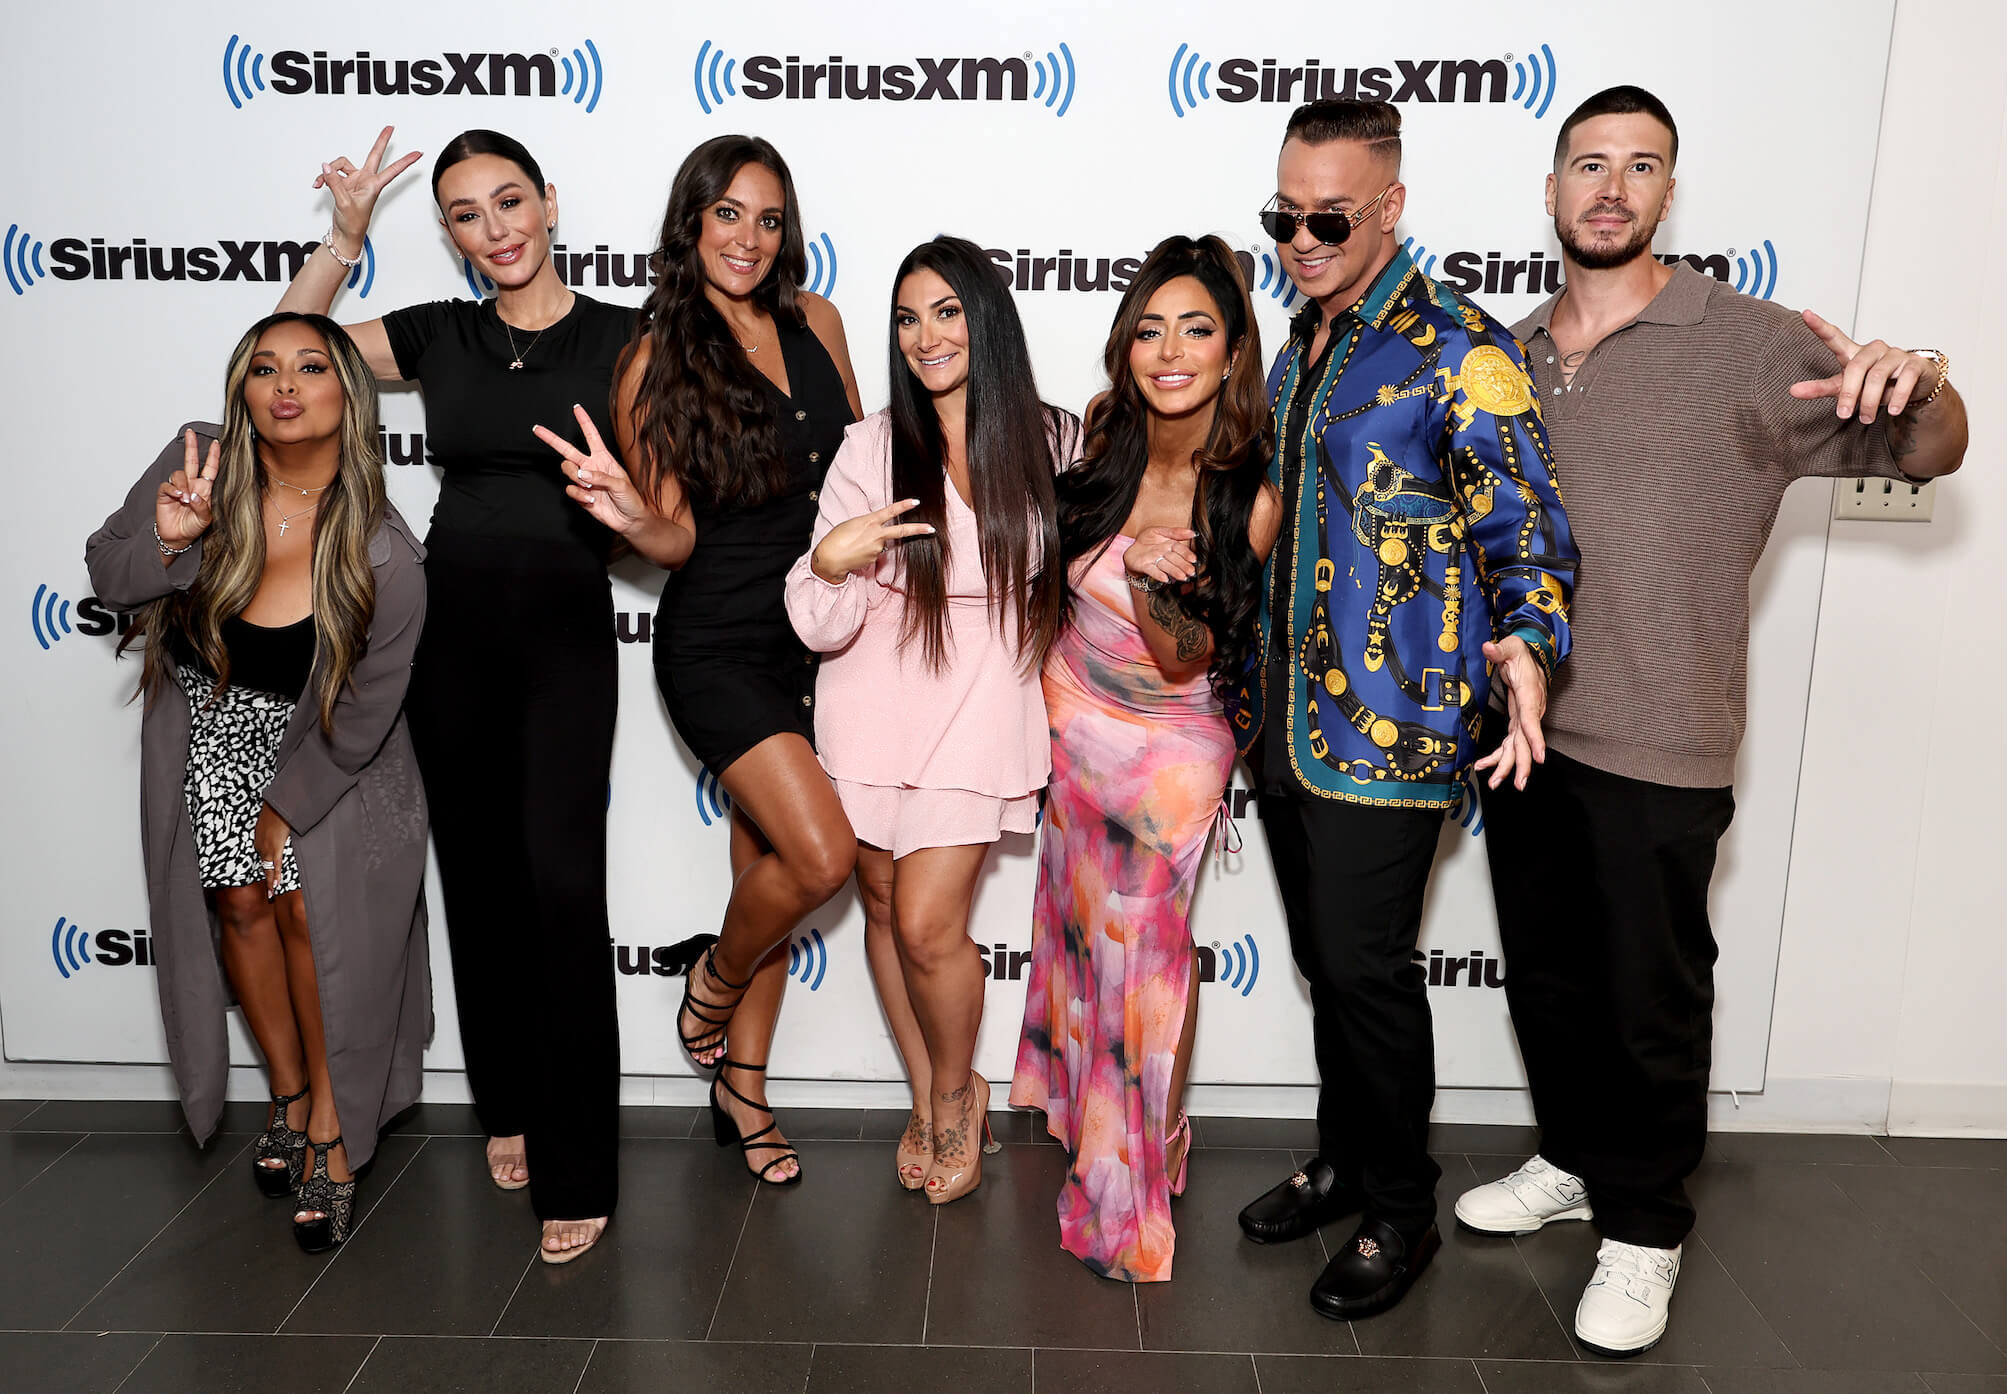 Nicole 'Snooki' Polizzi, Jenni 'JWoww' Farley, Sammi Giancola, Deena Nicole Cortese, Angelina Pivarnick, Mike 'The Situation' Sorrentino, and Vinny Guadagnino from 'Jersey Shore: Family Vacation' posing together for an event